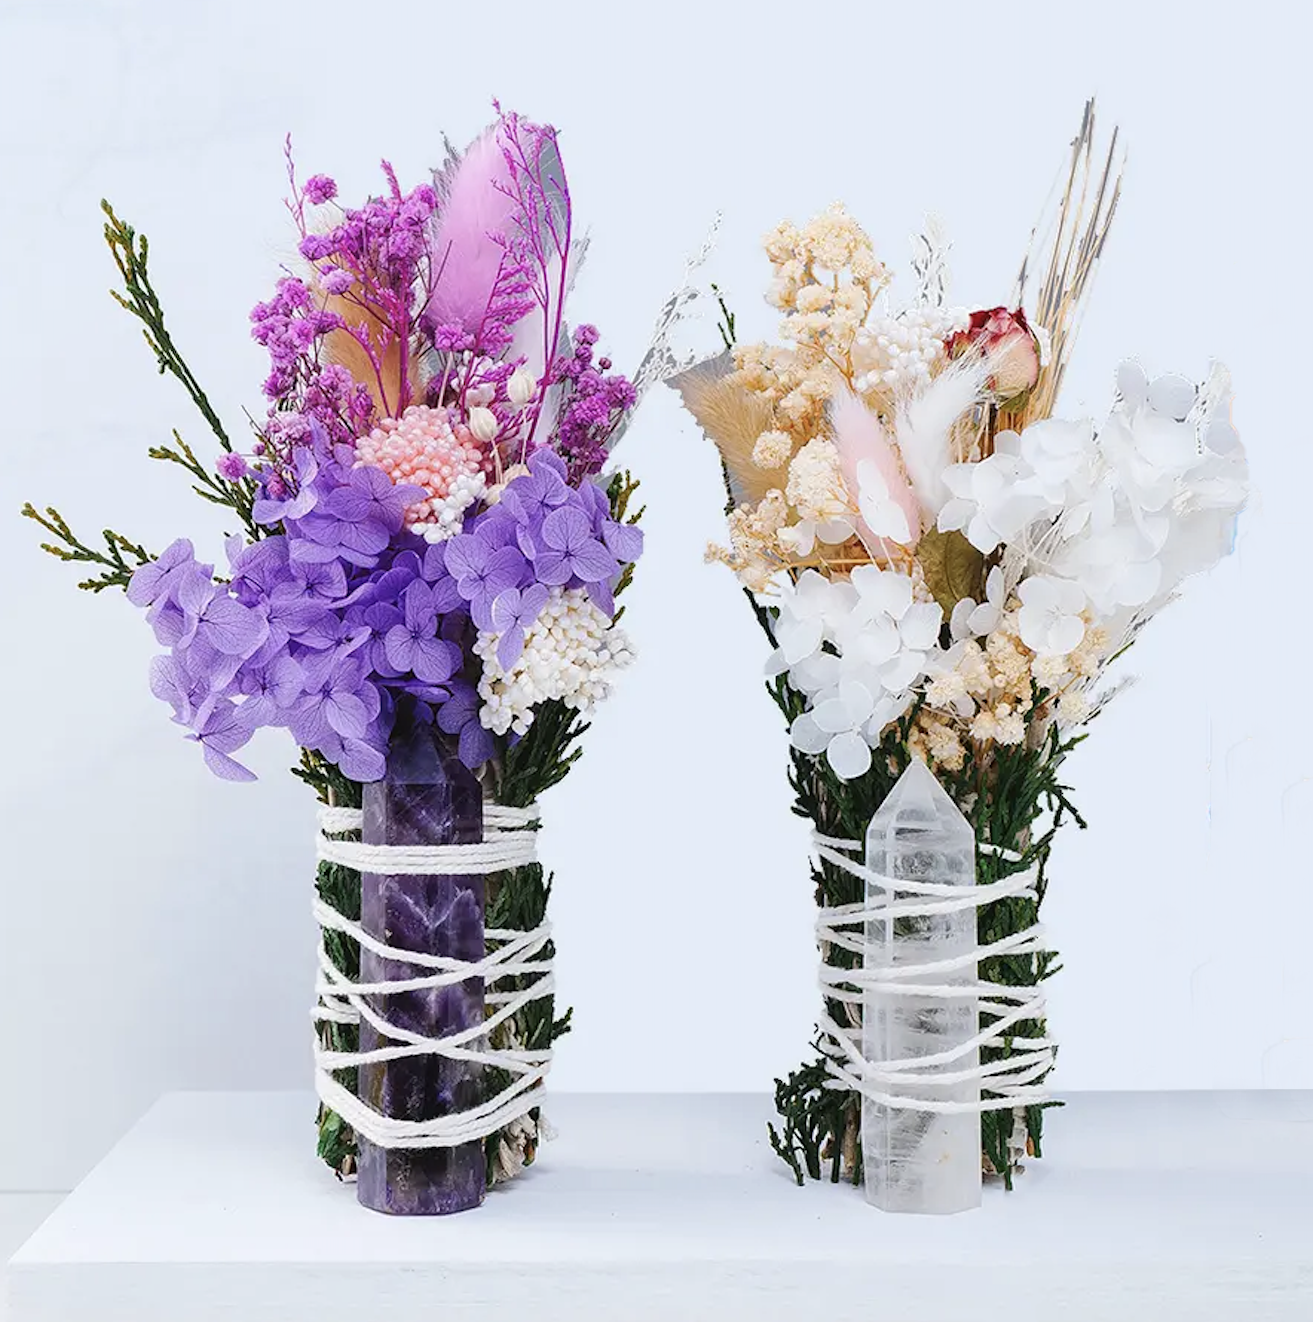 Serenity Bouquet with Healing Crystal Tower and Sage